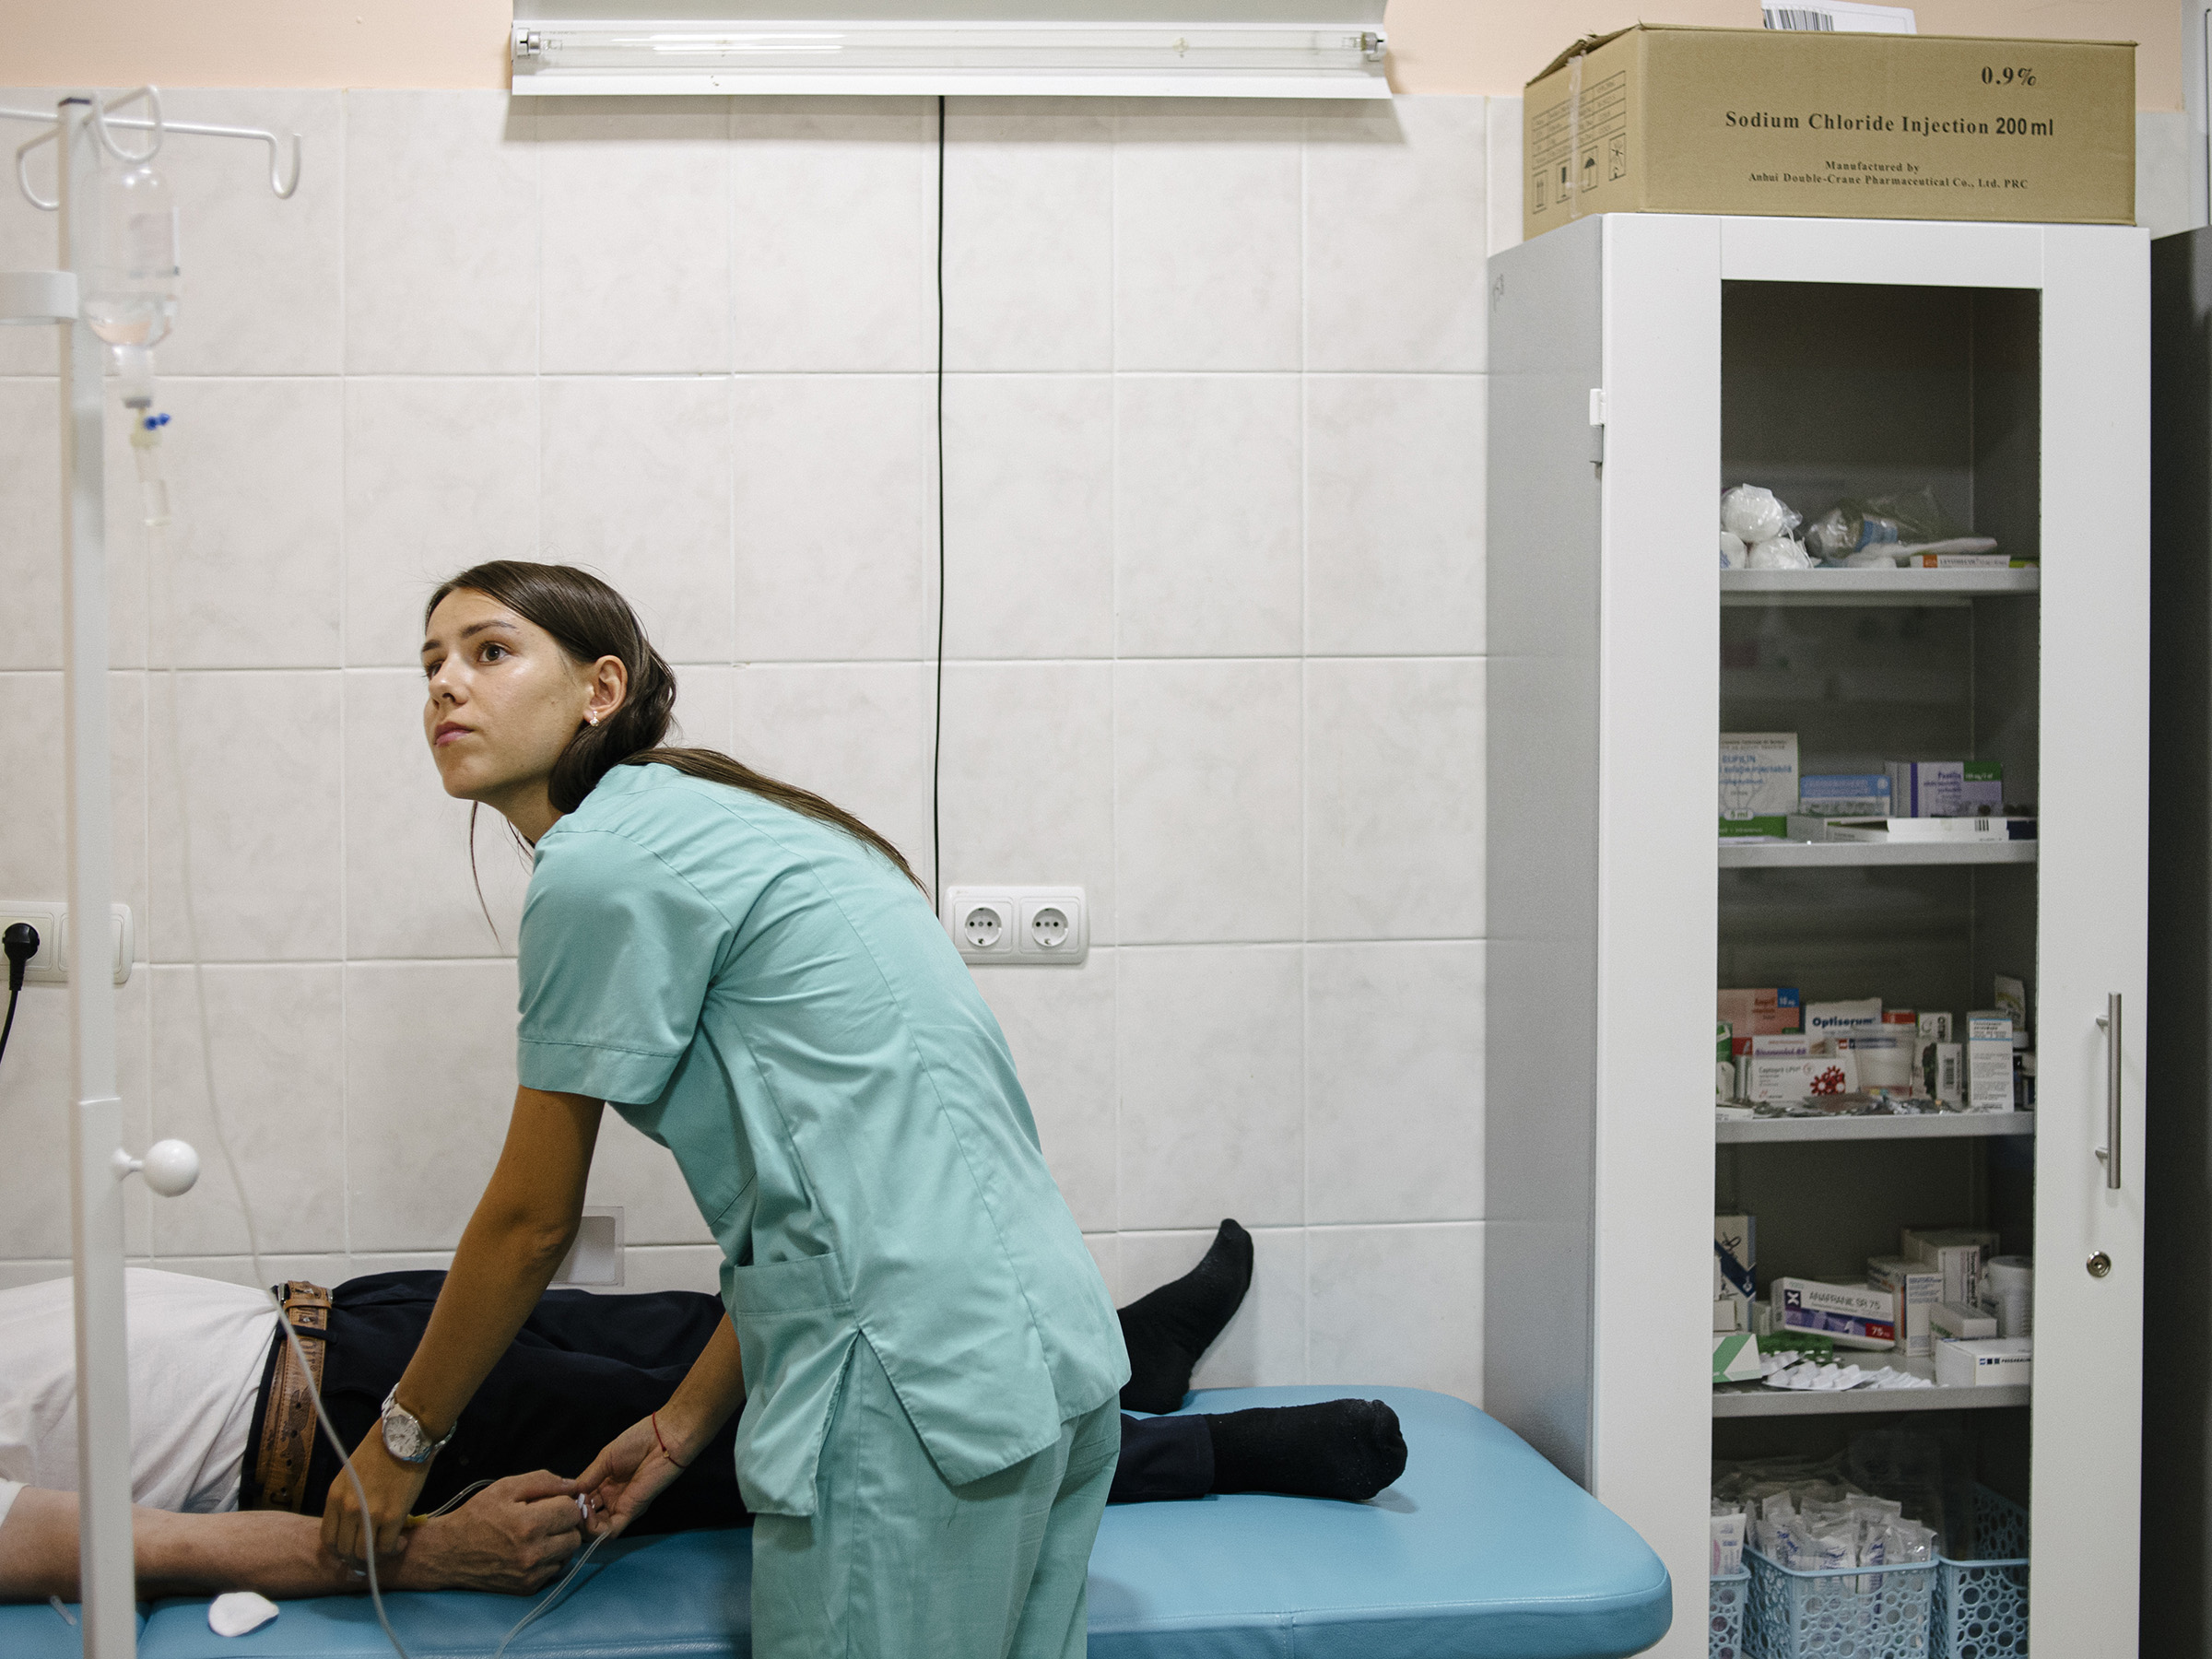 One of the crisis rooms at a rehab center in Chisinau, Moldova on Aug. 2, 2019. (Ramin Mazur for TIME)